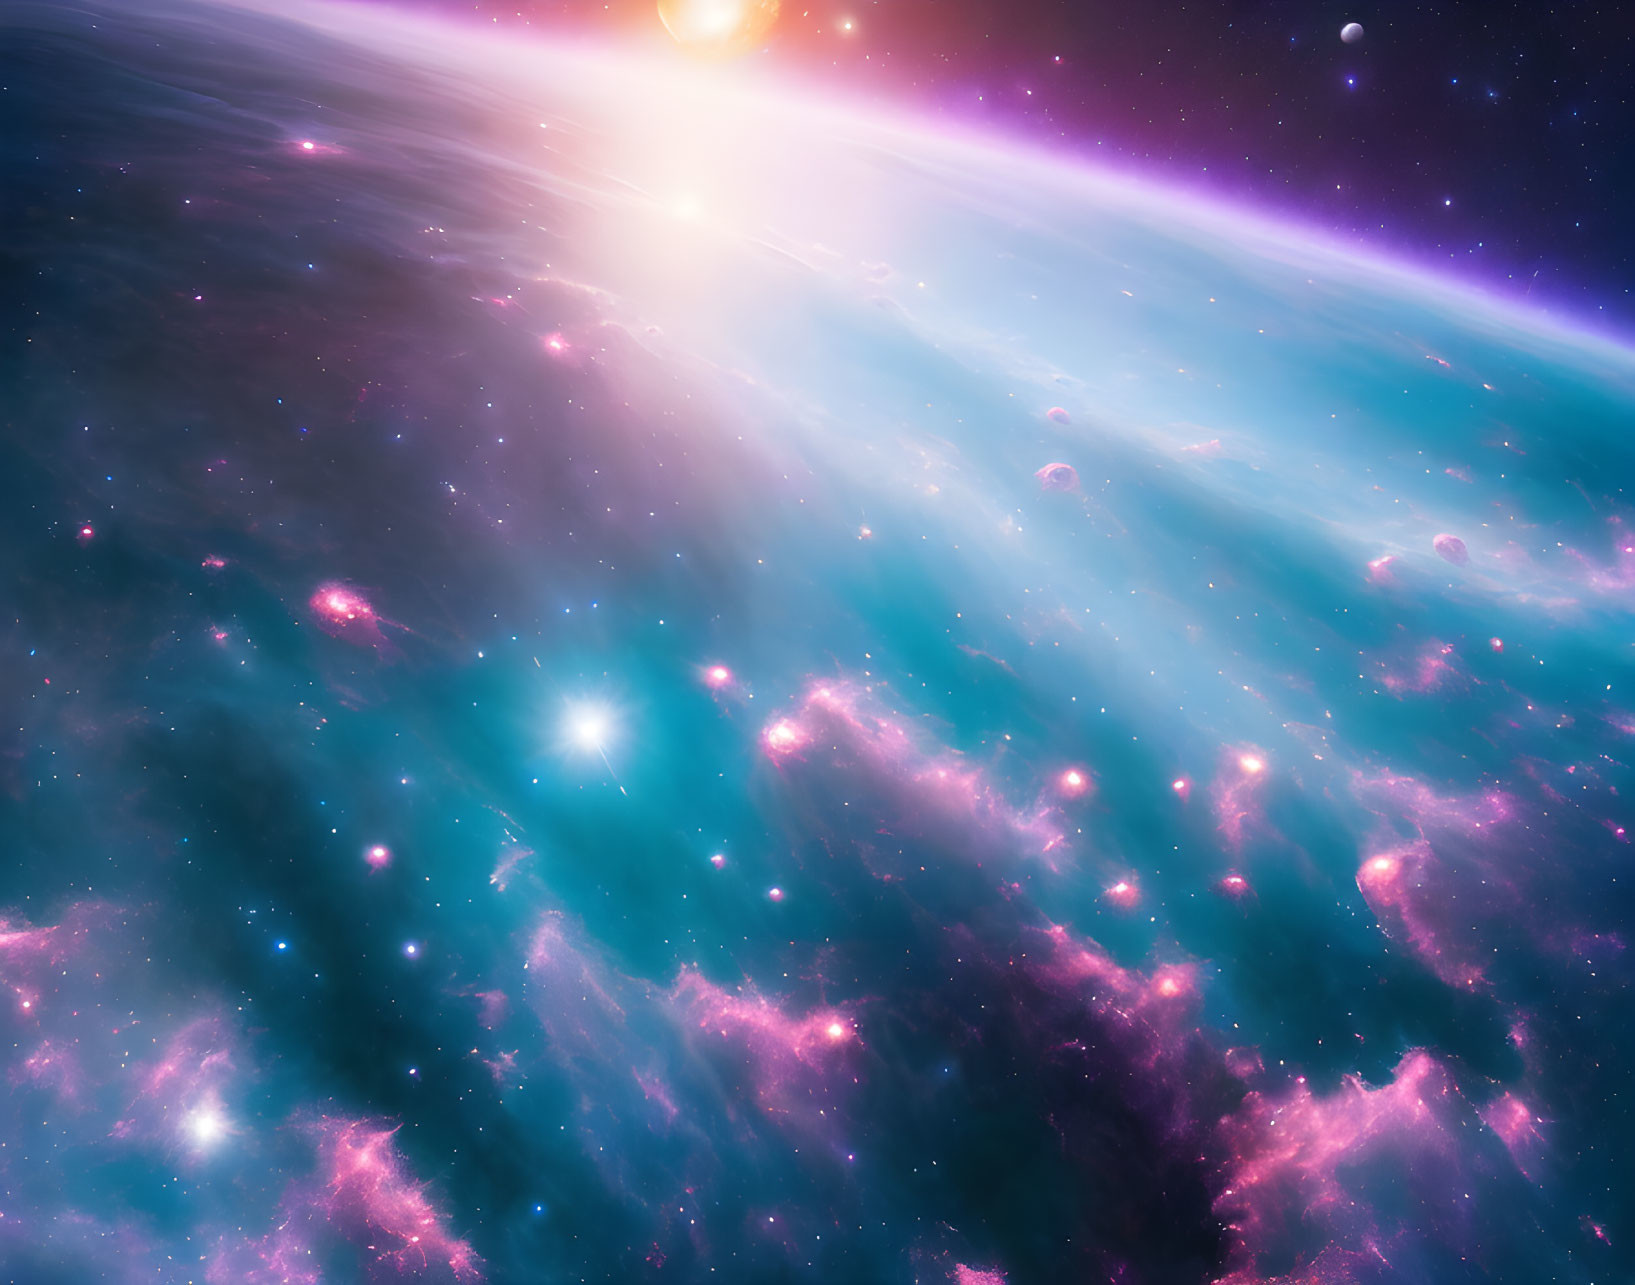 Vibrant space scene with sun, stars, nebulae, and cosmic dust in blue and